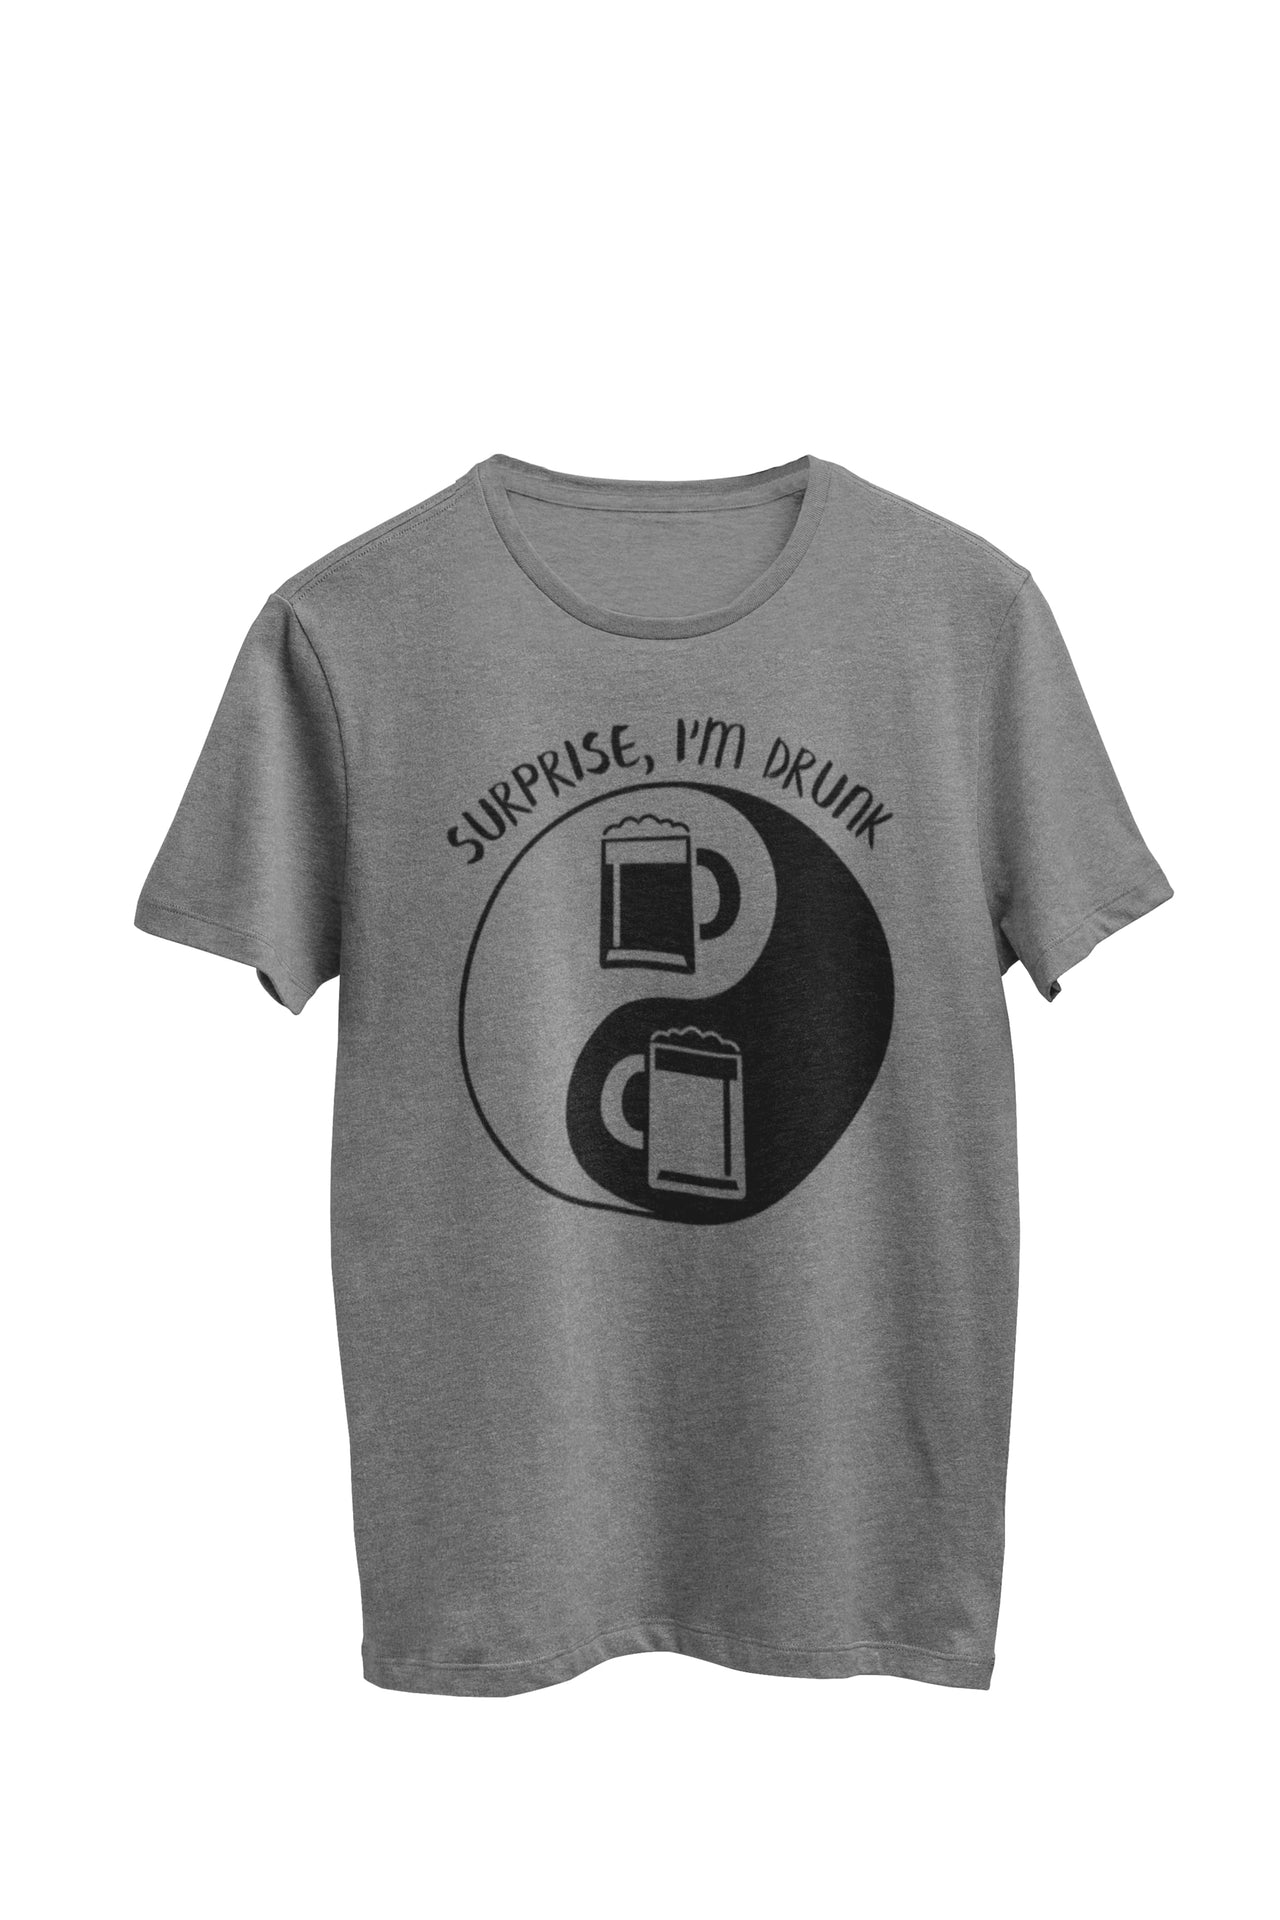 Heather Gray Unisex Tee featuring a Yin Yang symbol with beer mugs, designed by WooHoo Apparel. The text reads 'Surprise, I'm drunk.